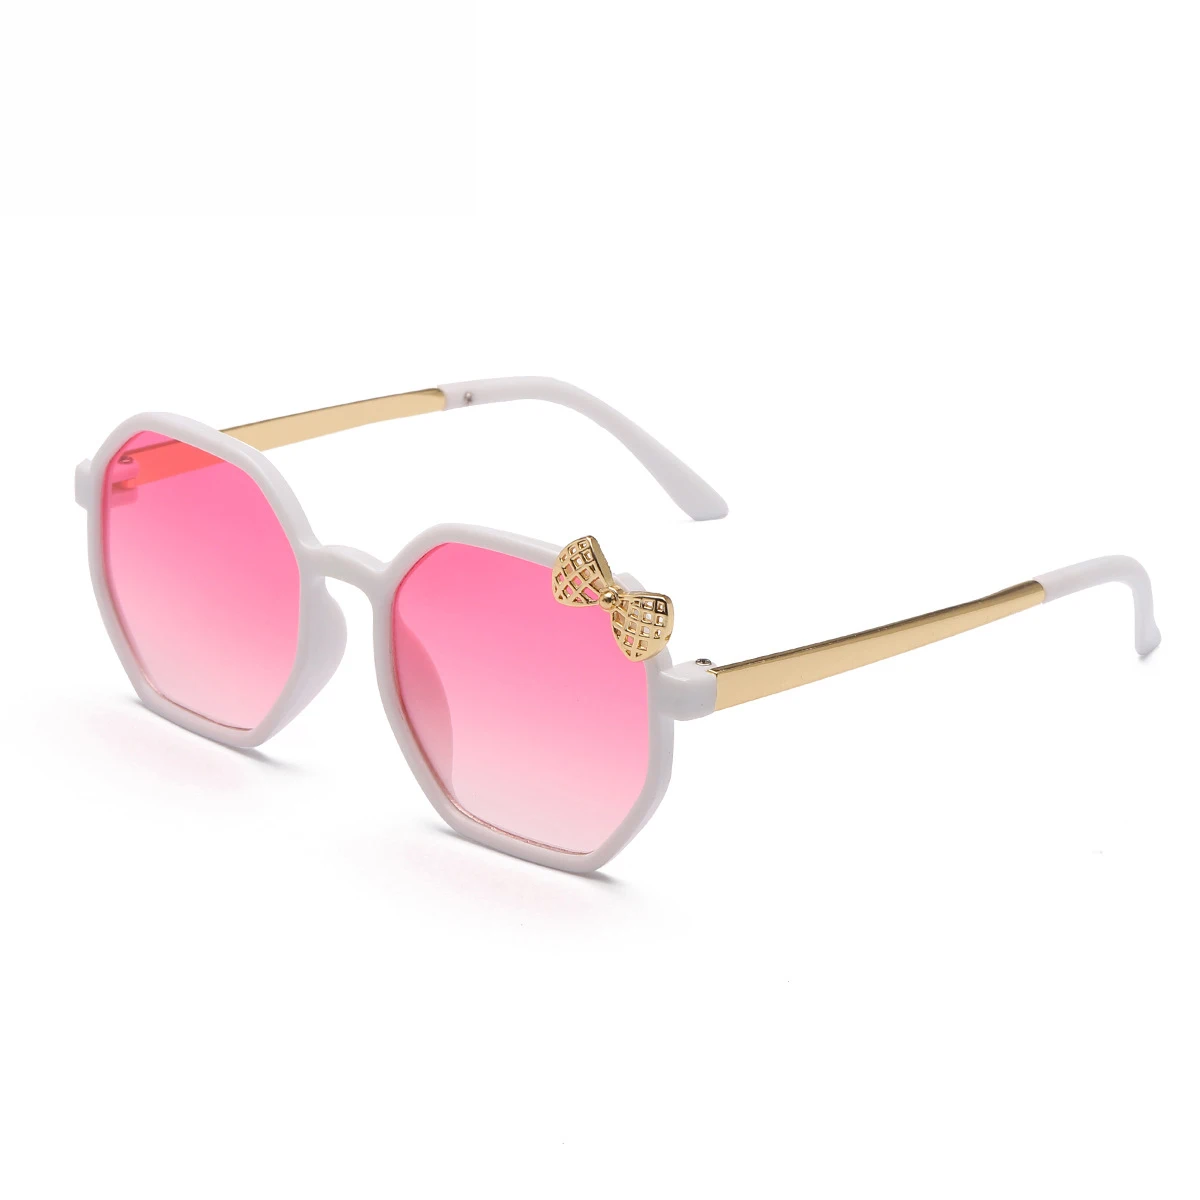 

Pink Square Kids Sunglasses Children Cute Butterfly Tie Metal Sun Glasses Girls Boys Baby Trends 2021 Gifts Colored Lenses Vogue